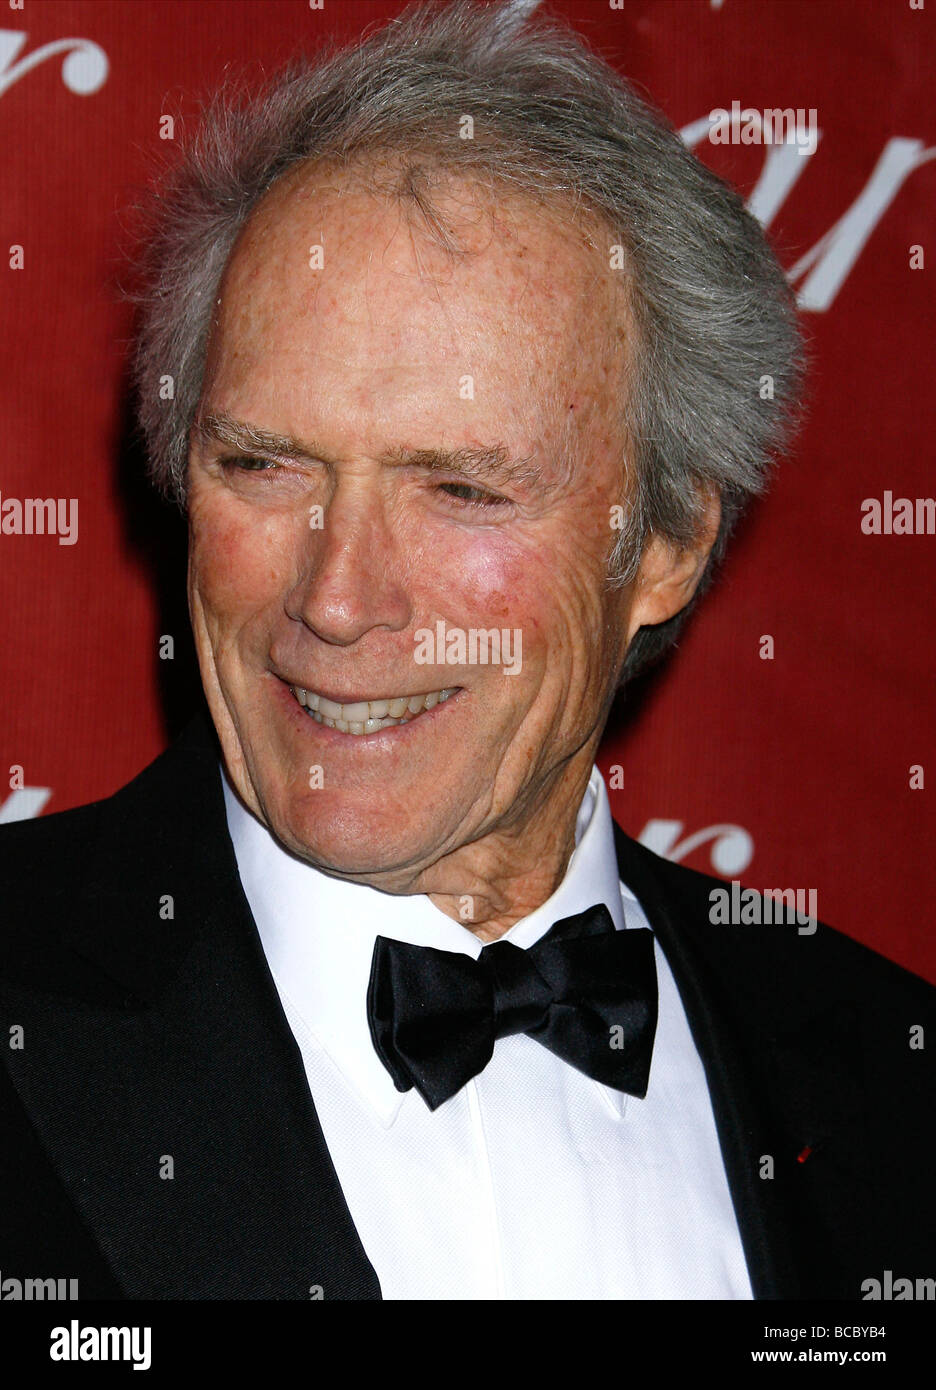 CLINT EASTWOOD  - US film actor/producer in 2009 Stock Photo